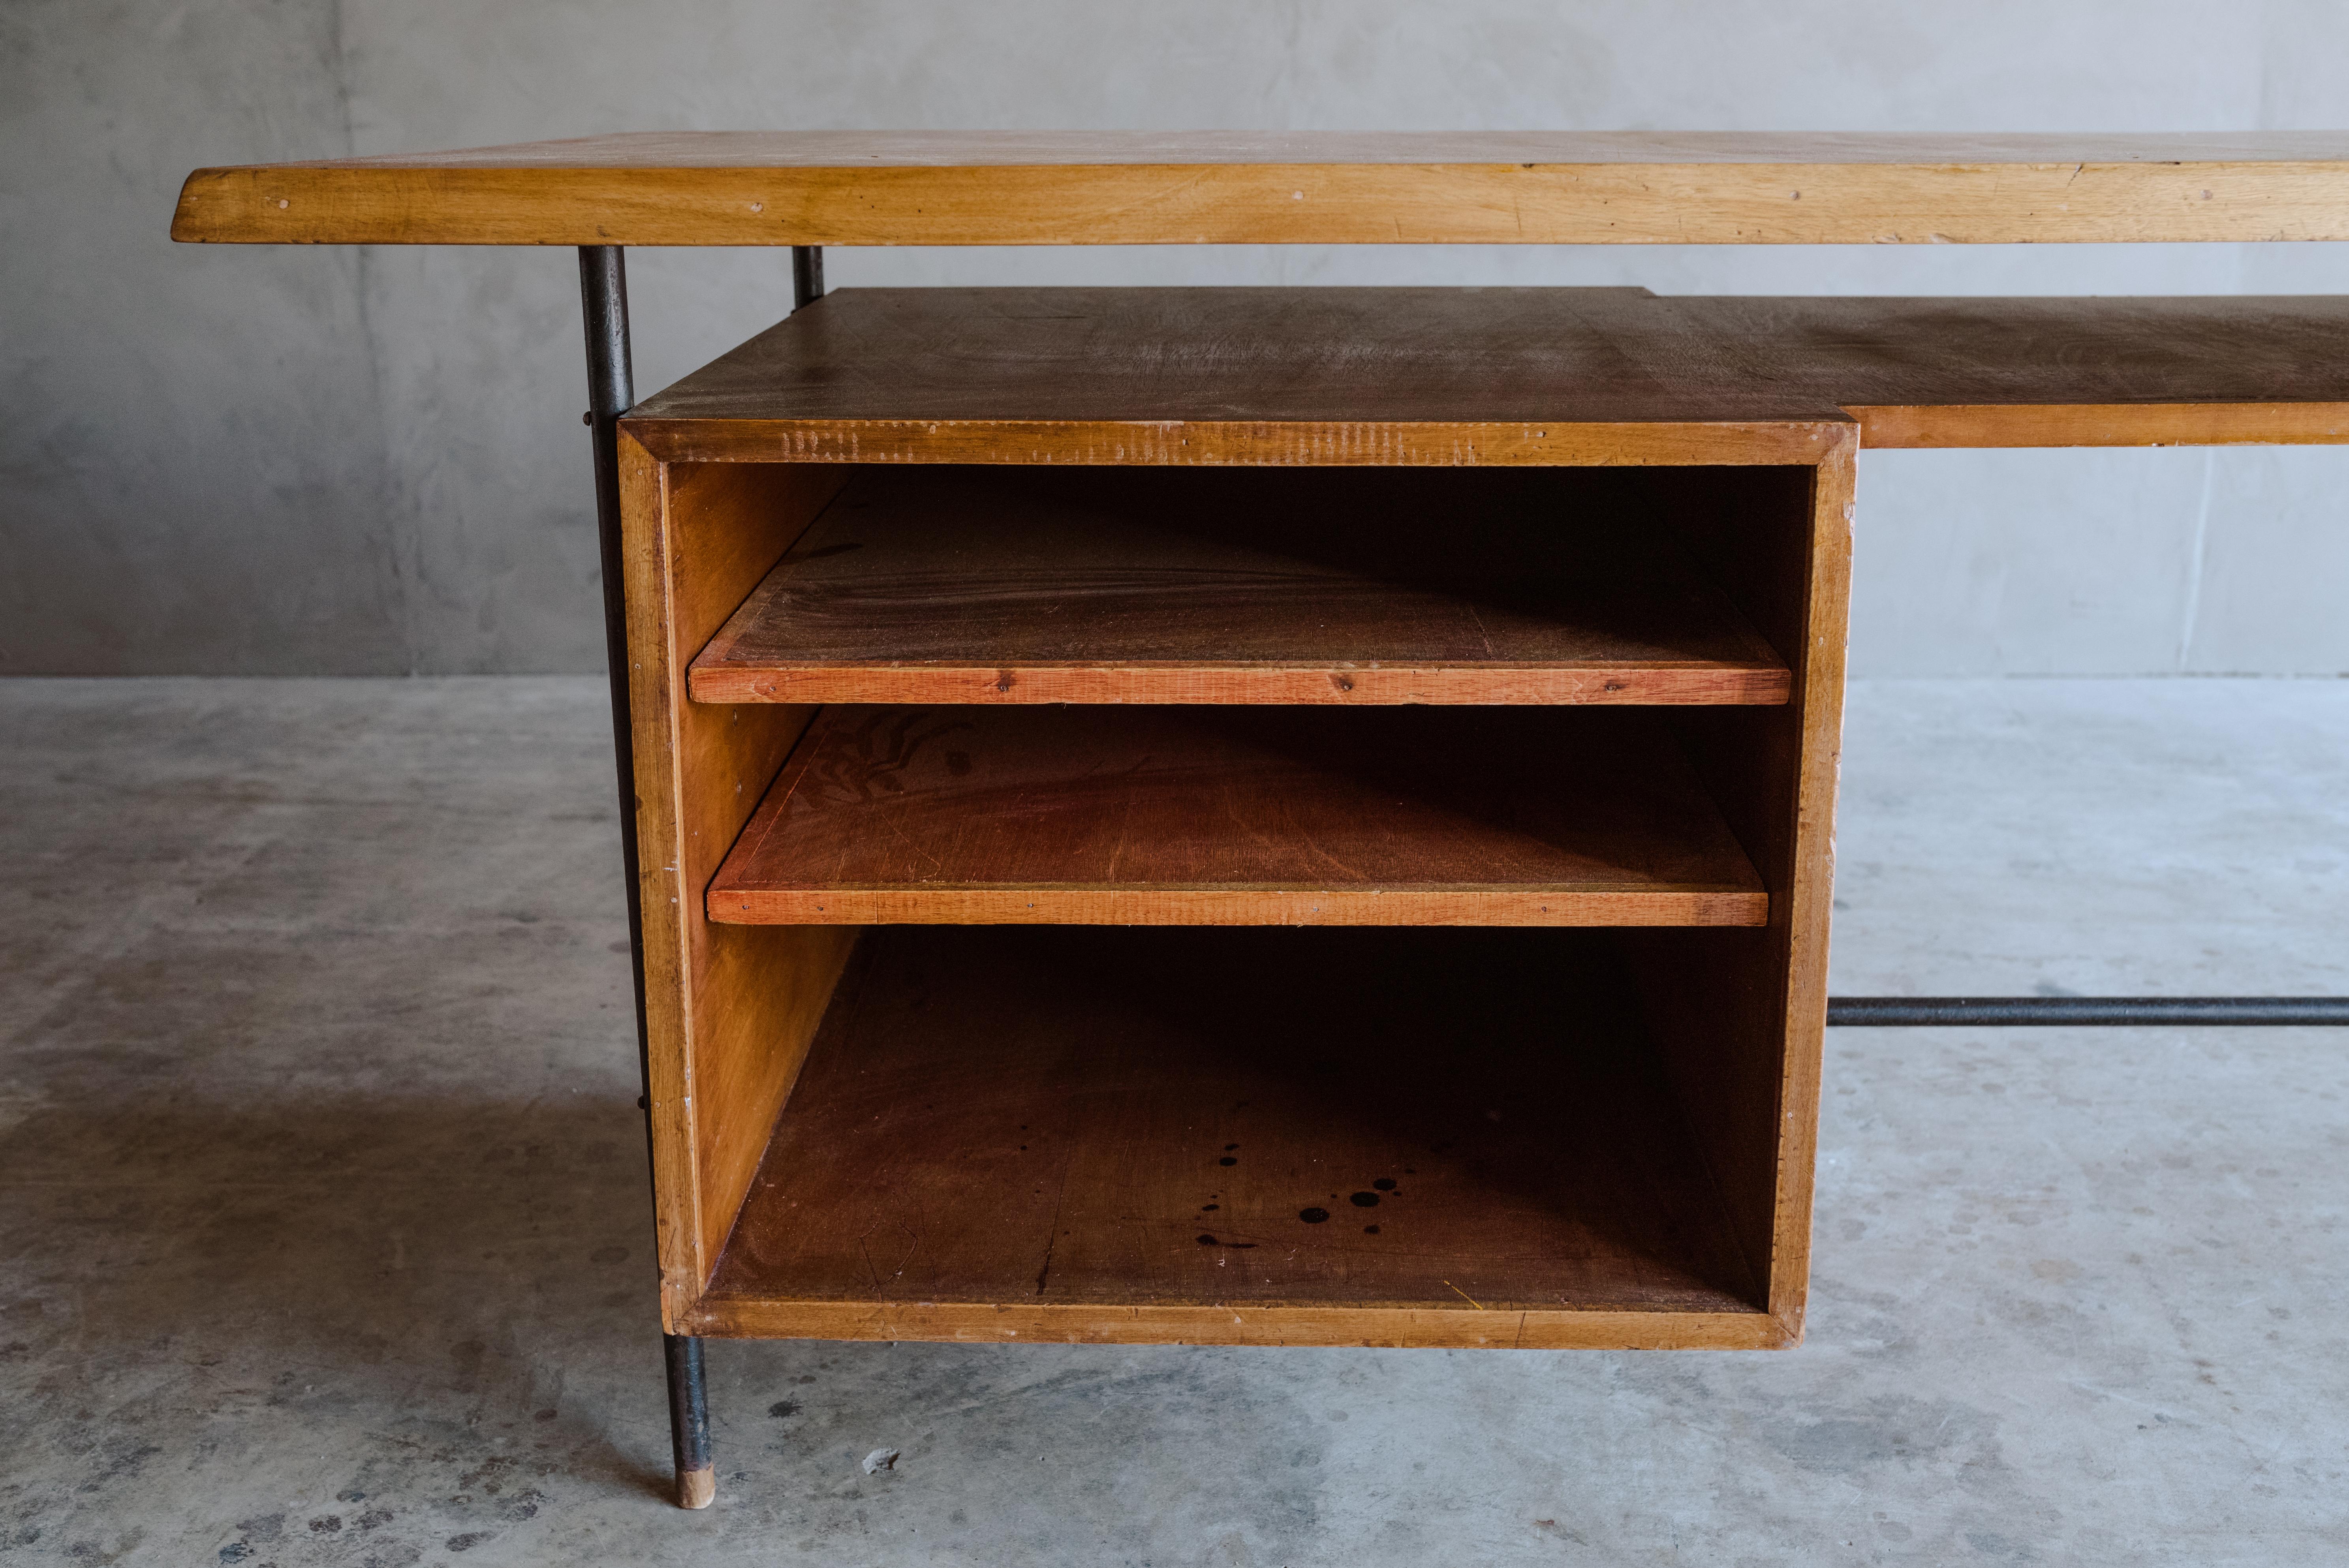 Rare architect's desk from France, circa 1960. Fantastic model with an iron frame and oak top. Adjustable shelves. Wood tips on feet.